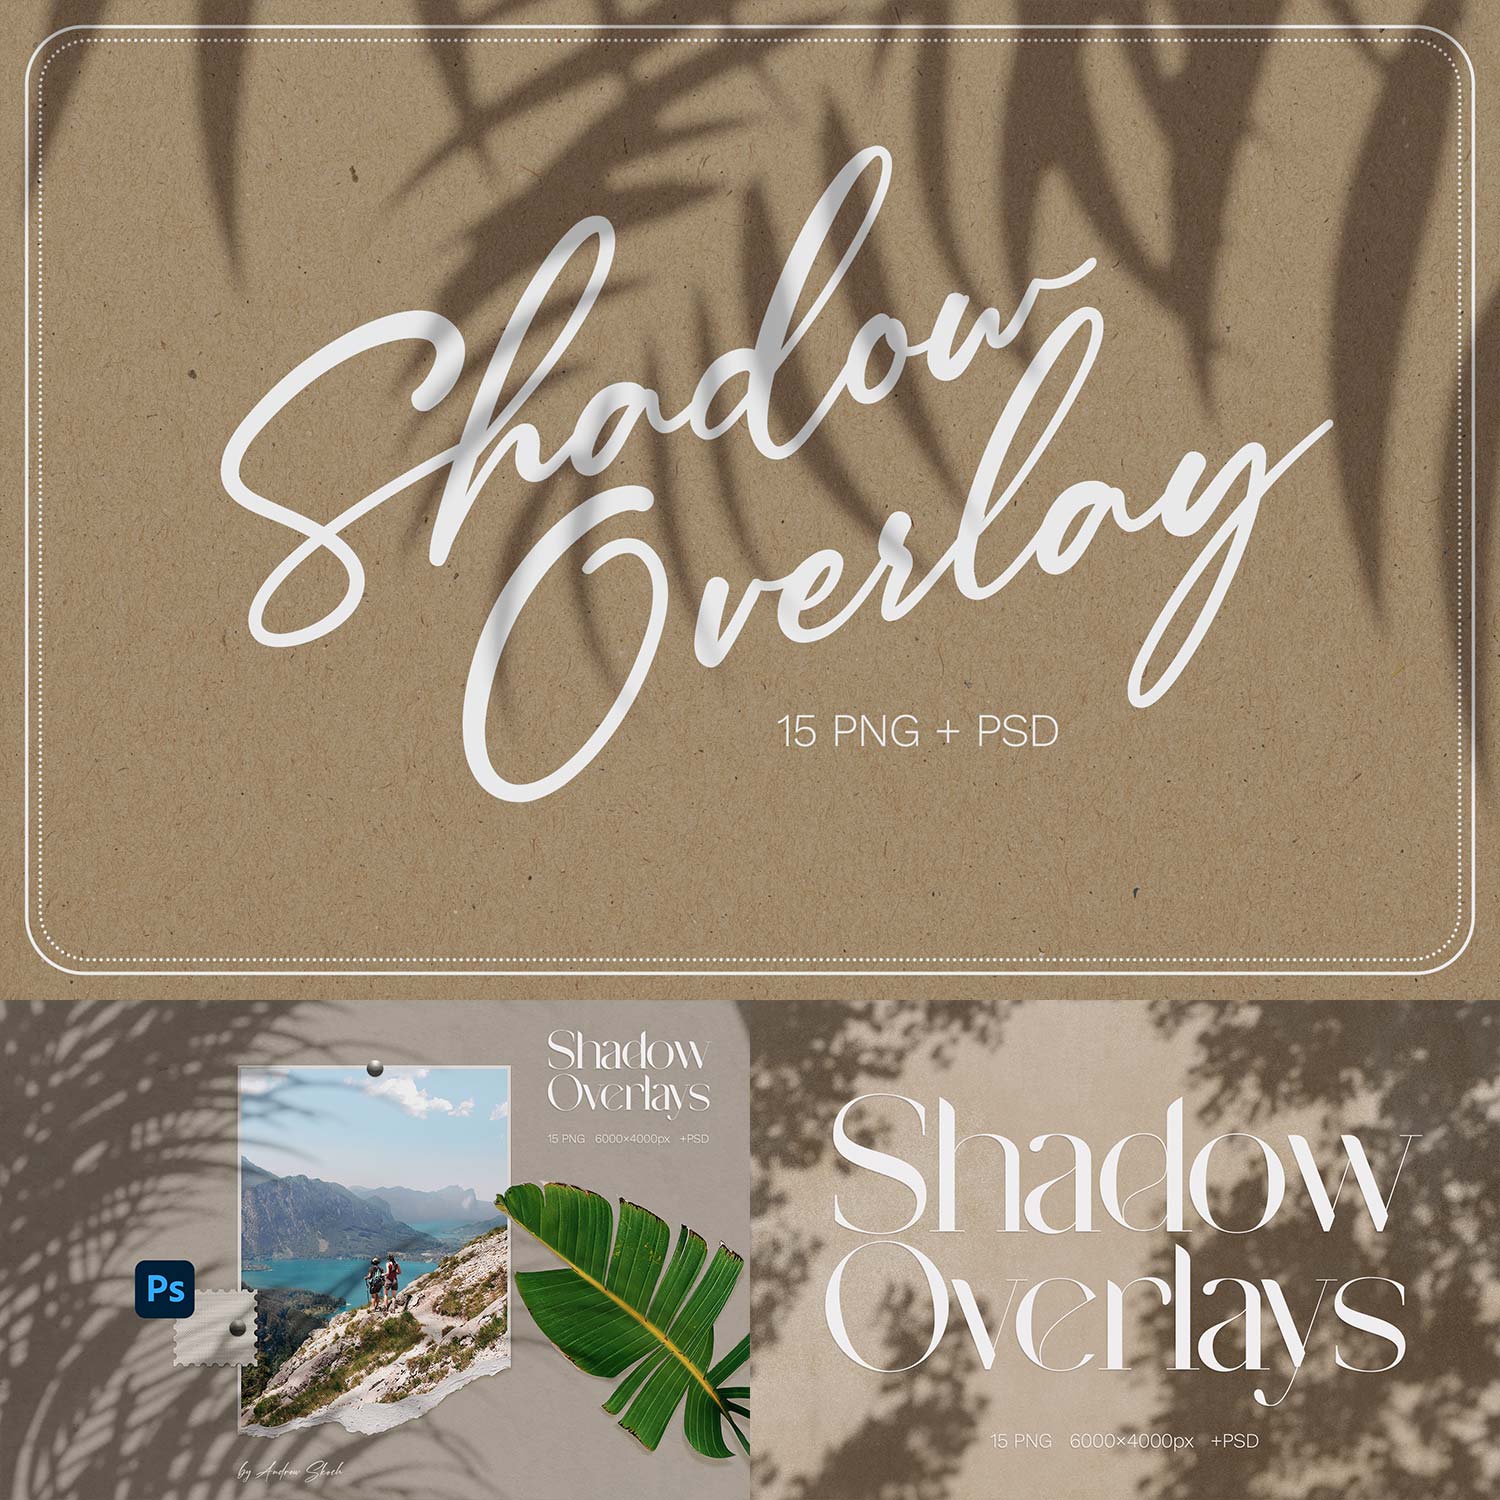 Shadow Overlays preview image.